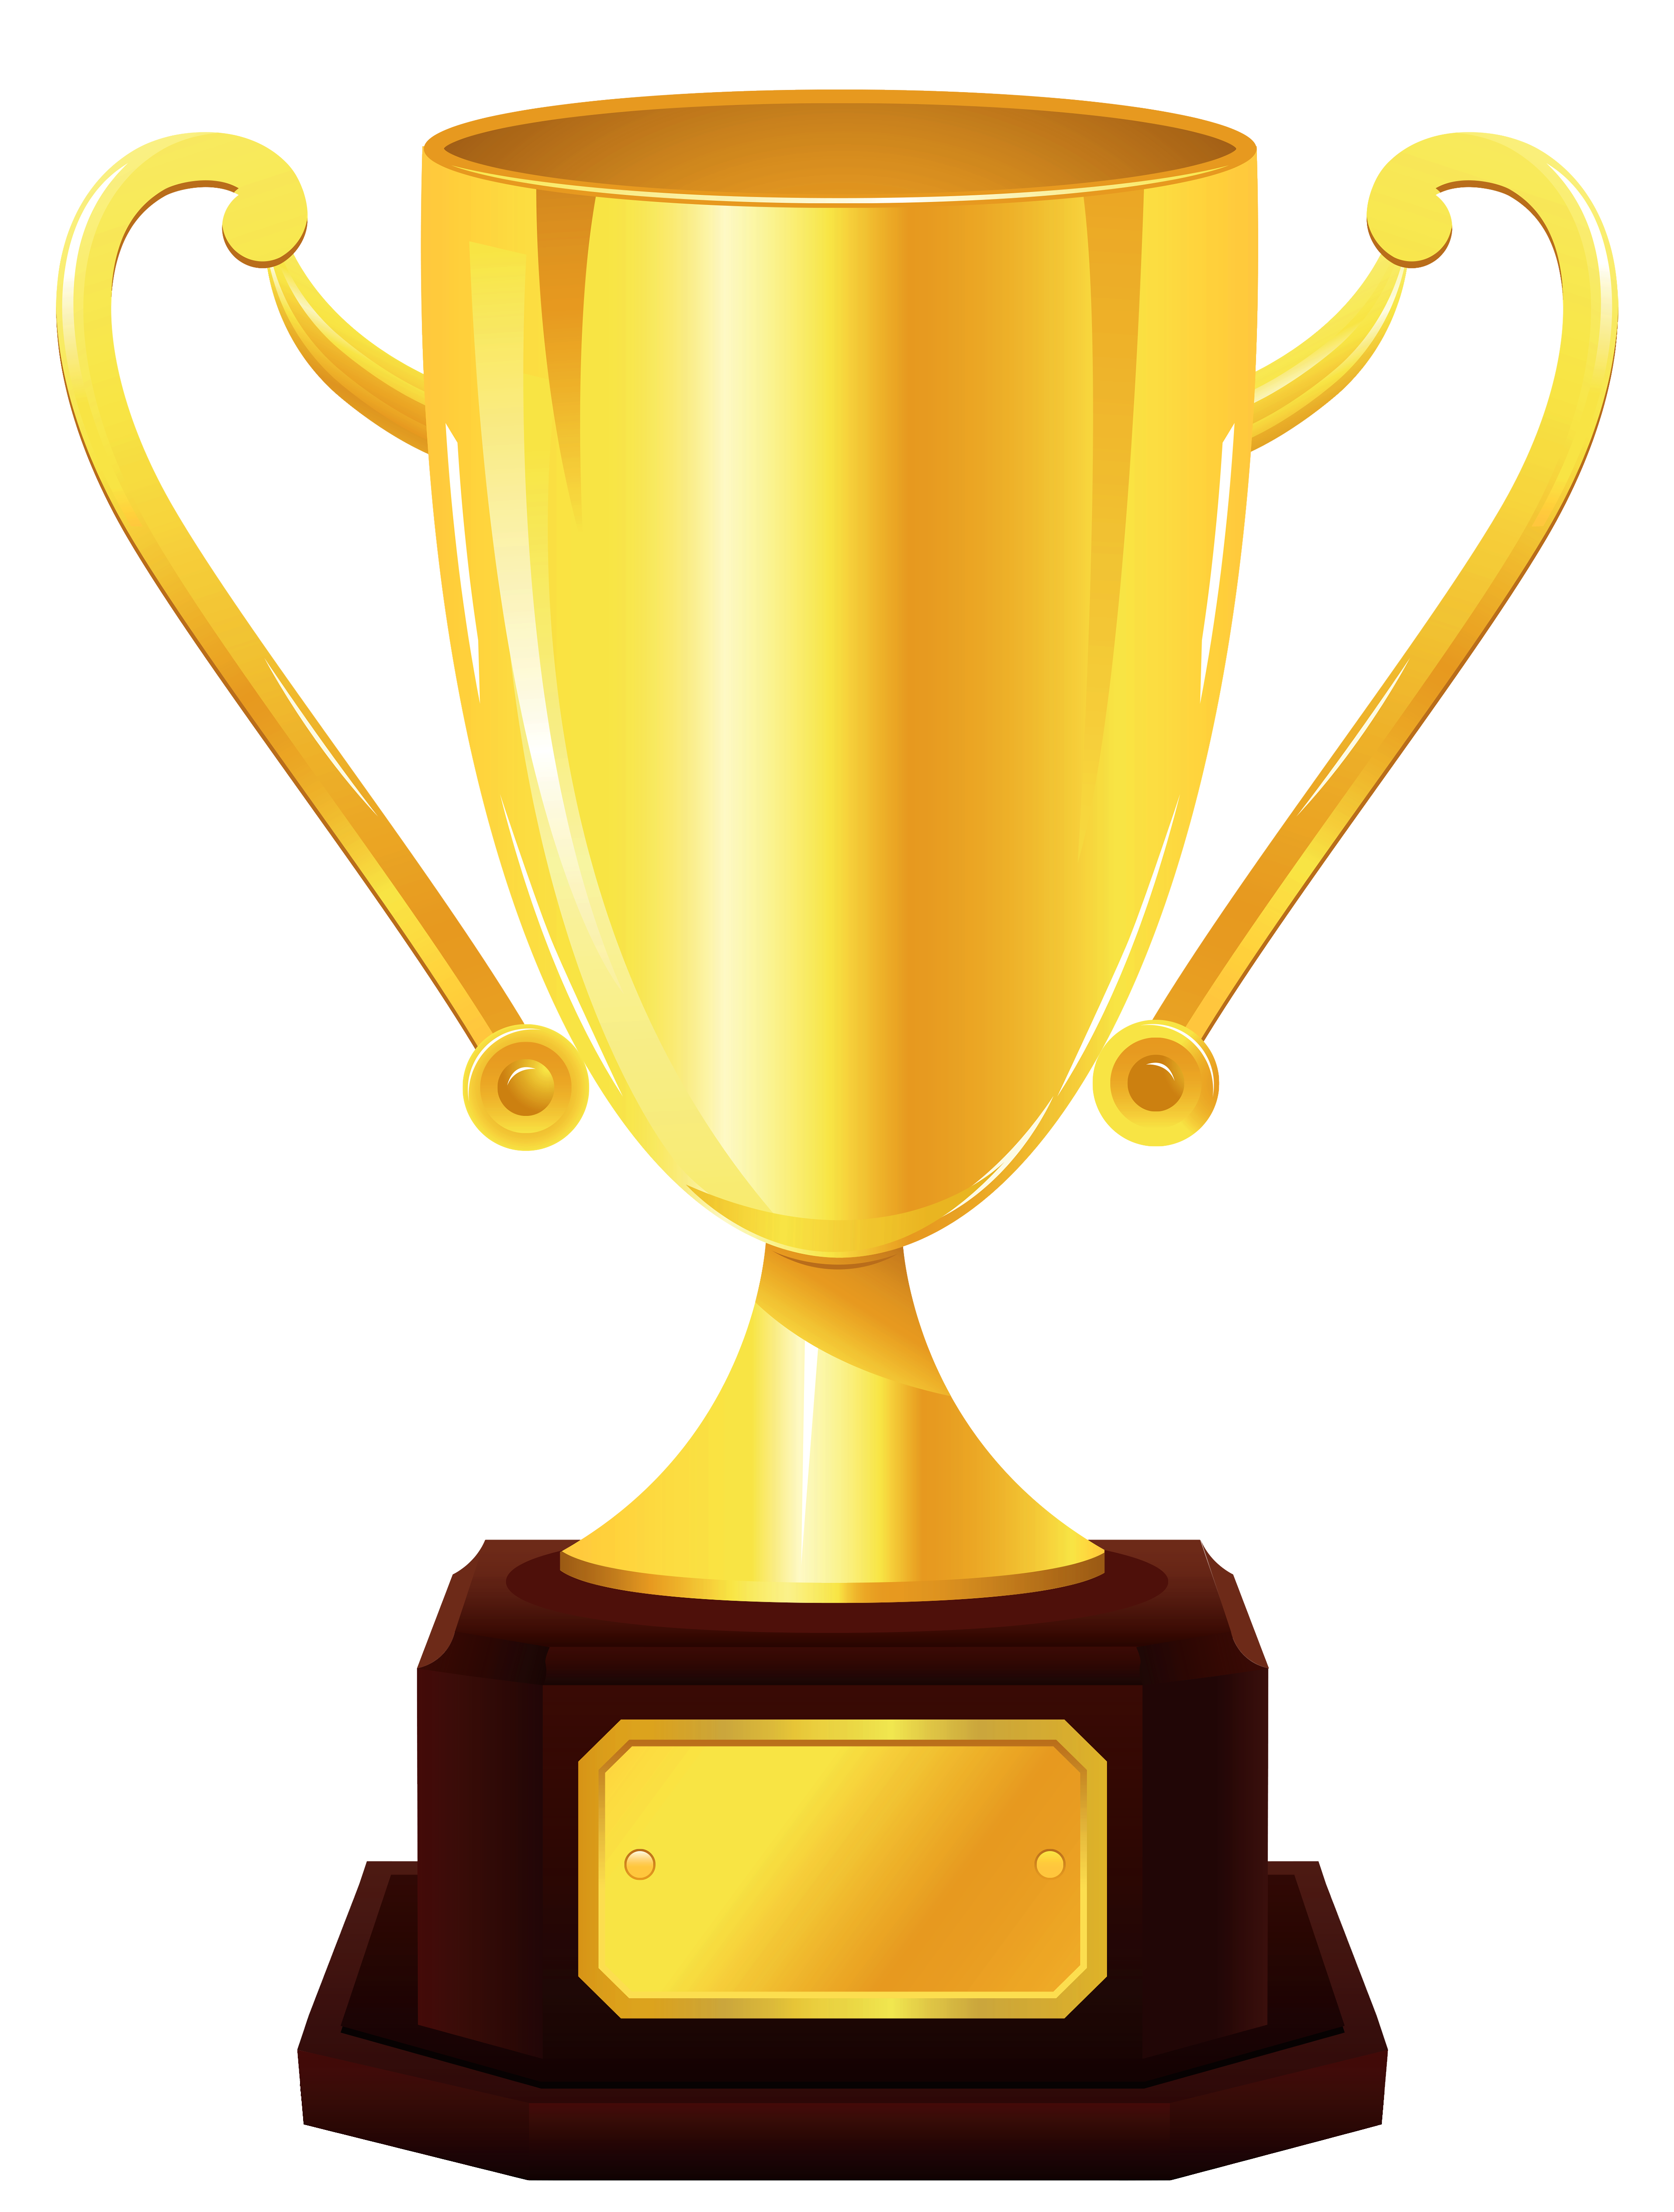 Trophy Clip Art Gold Cup Trophy Png Clipart Picture Png Download